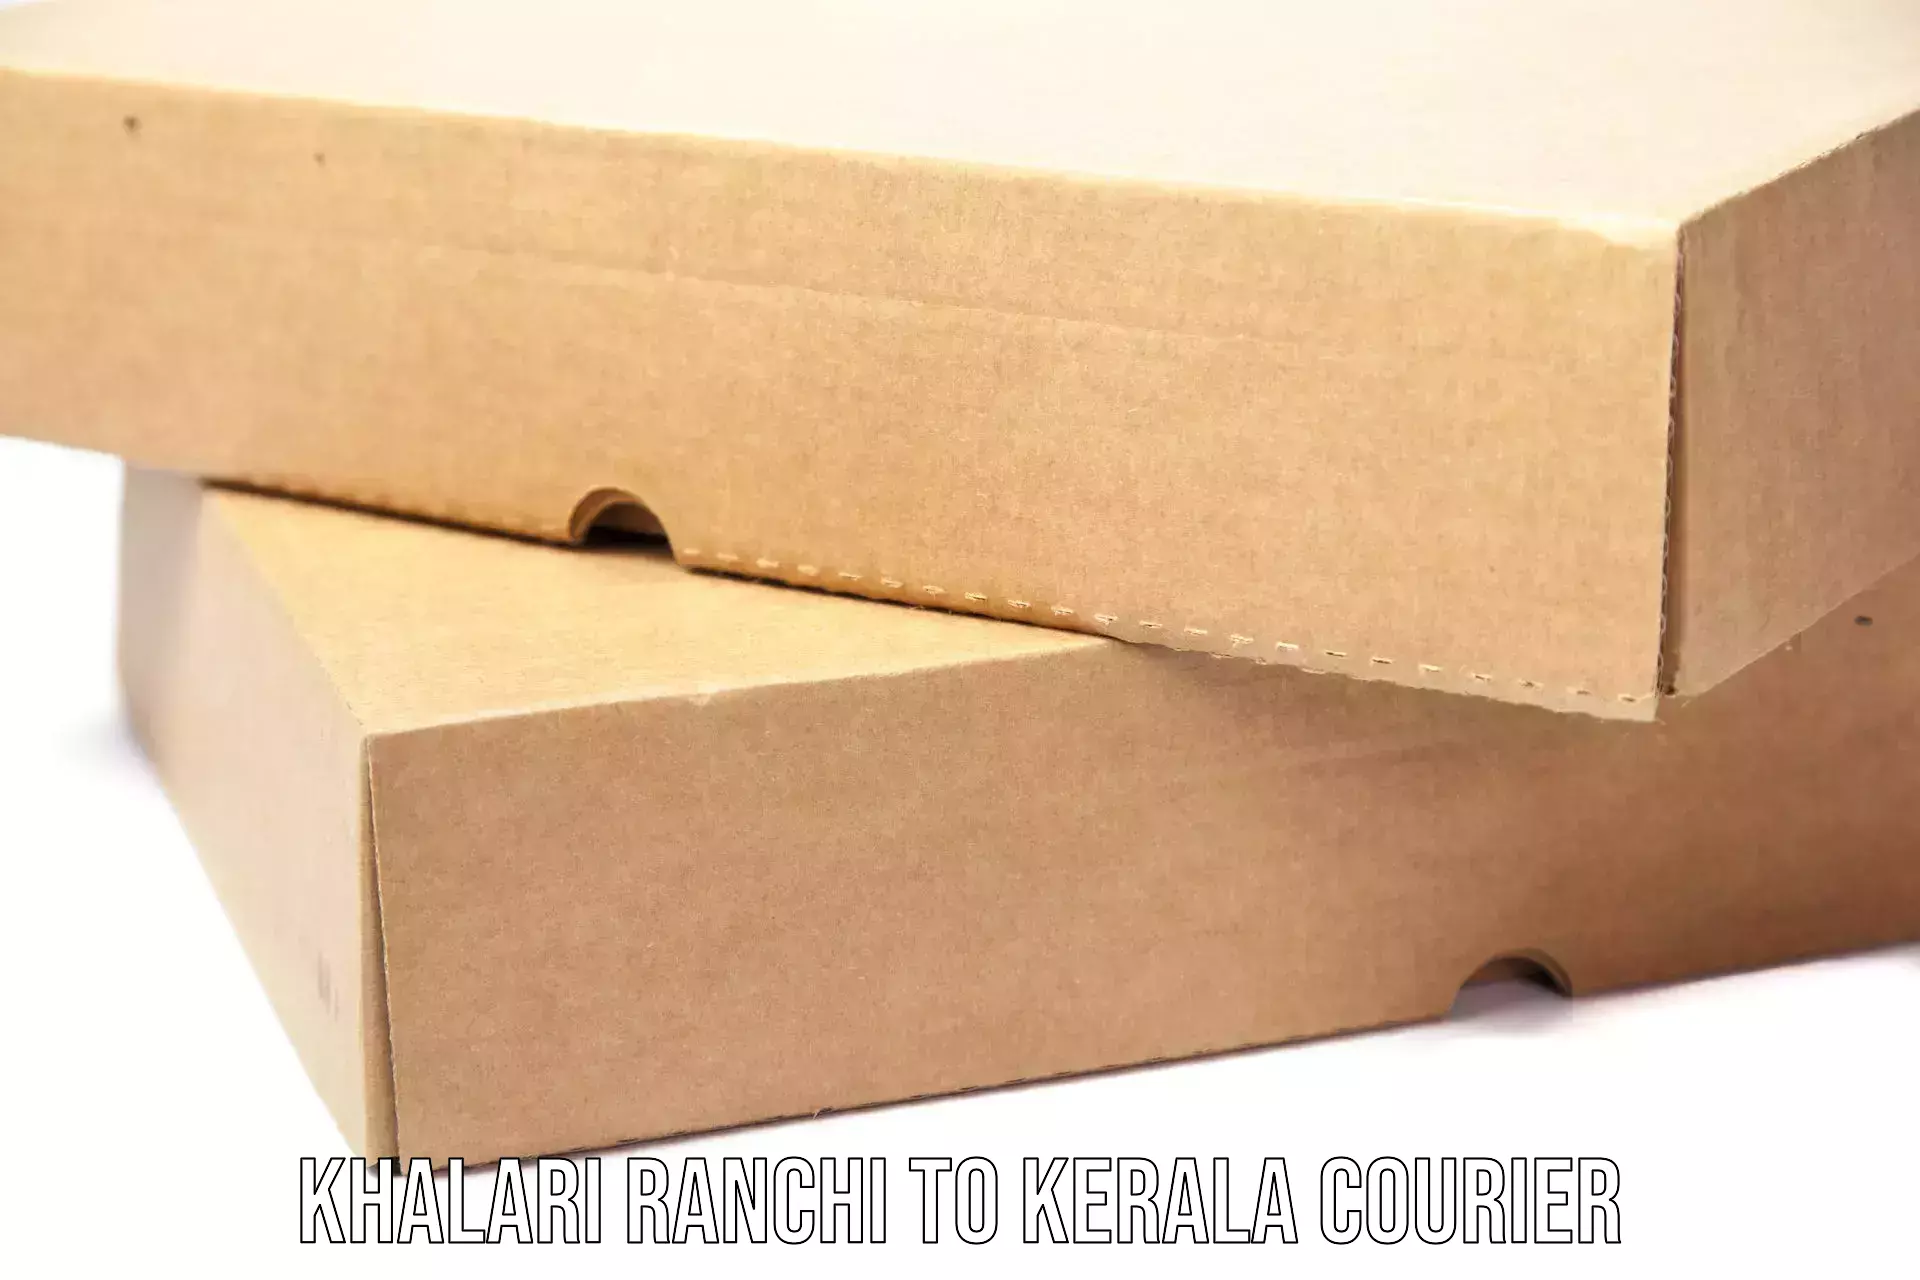 Courier services in Khalari Ranchi to Valanchery